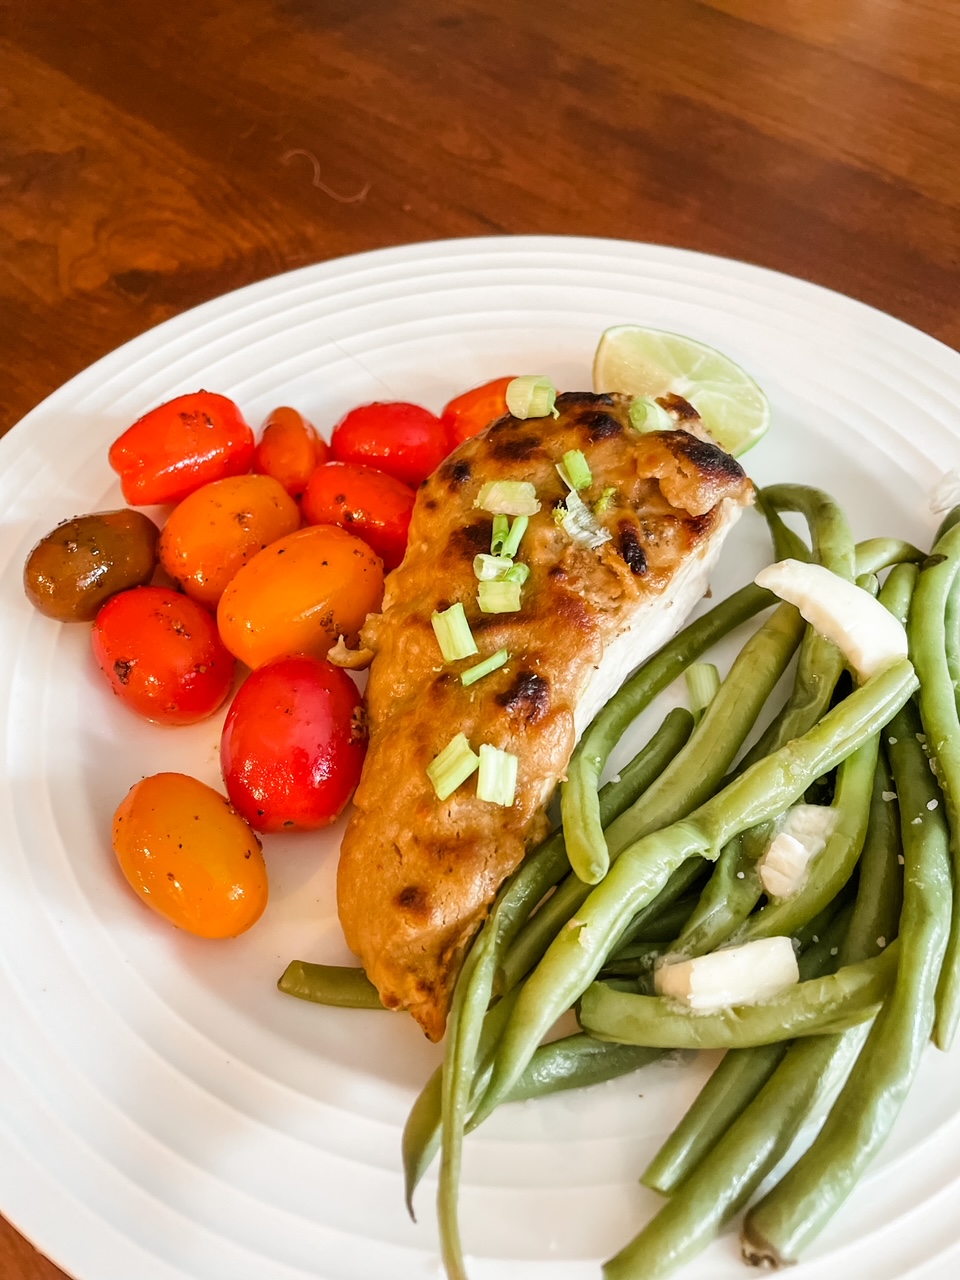 A plate of the 5 Ingredient Peanut Chicken with blistered tomatoes and green beans